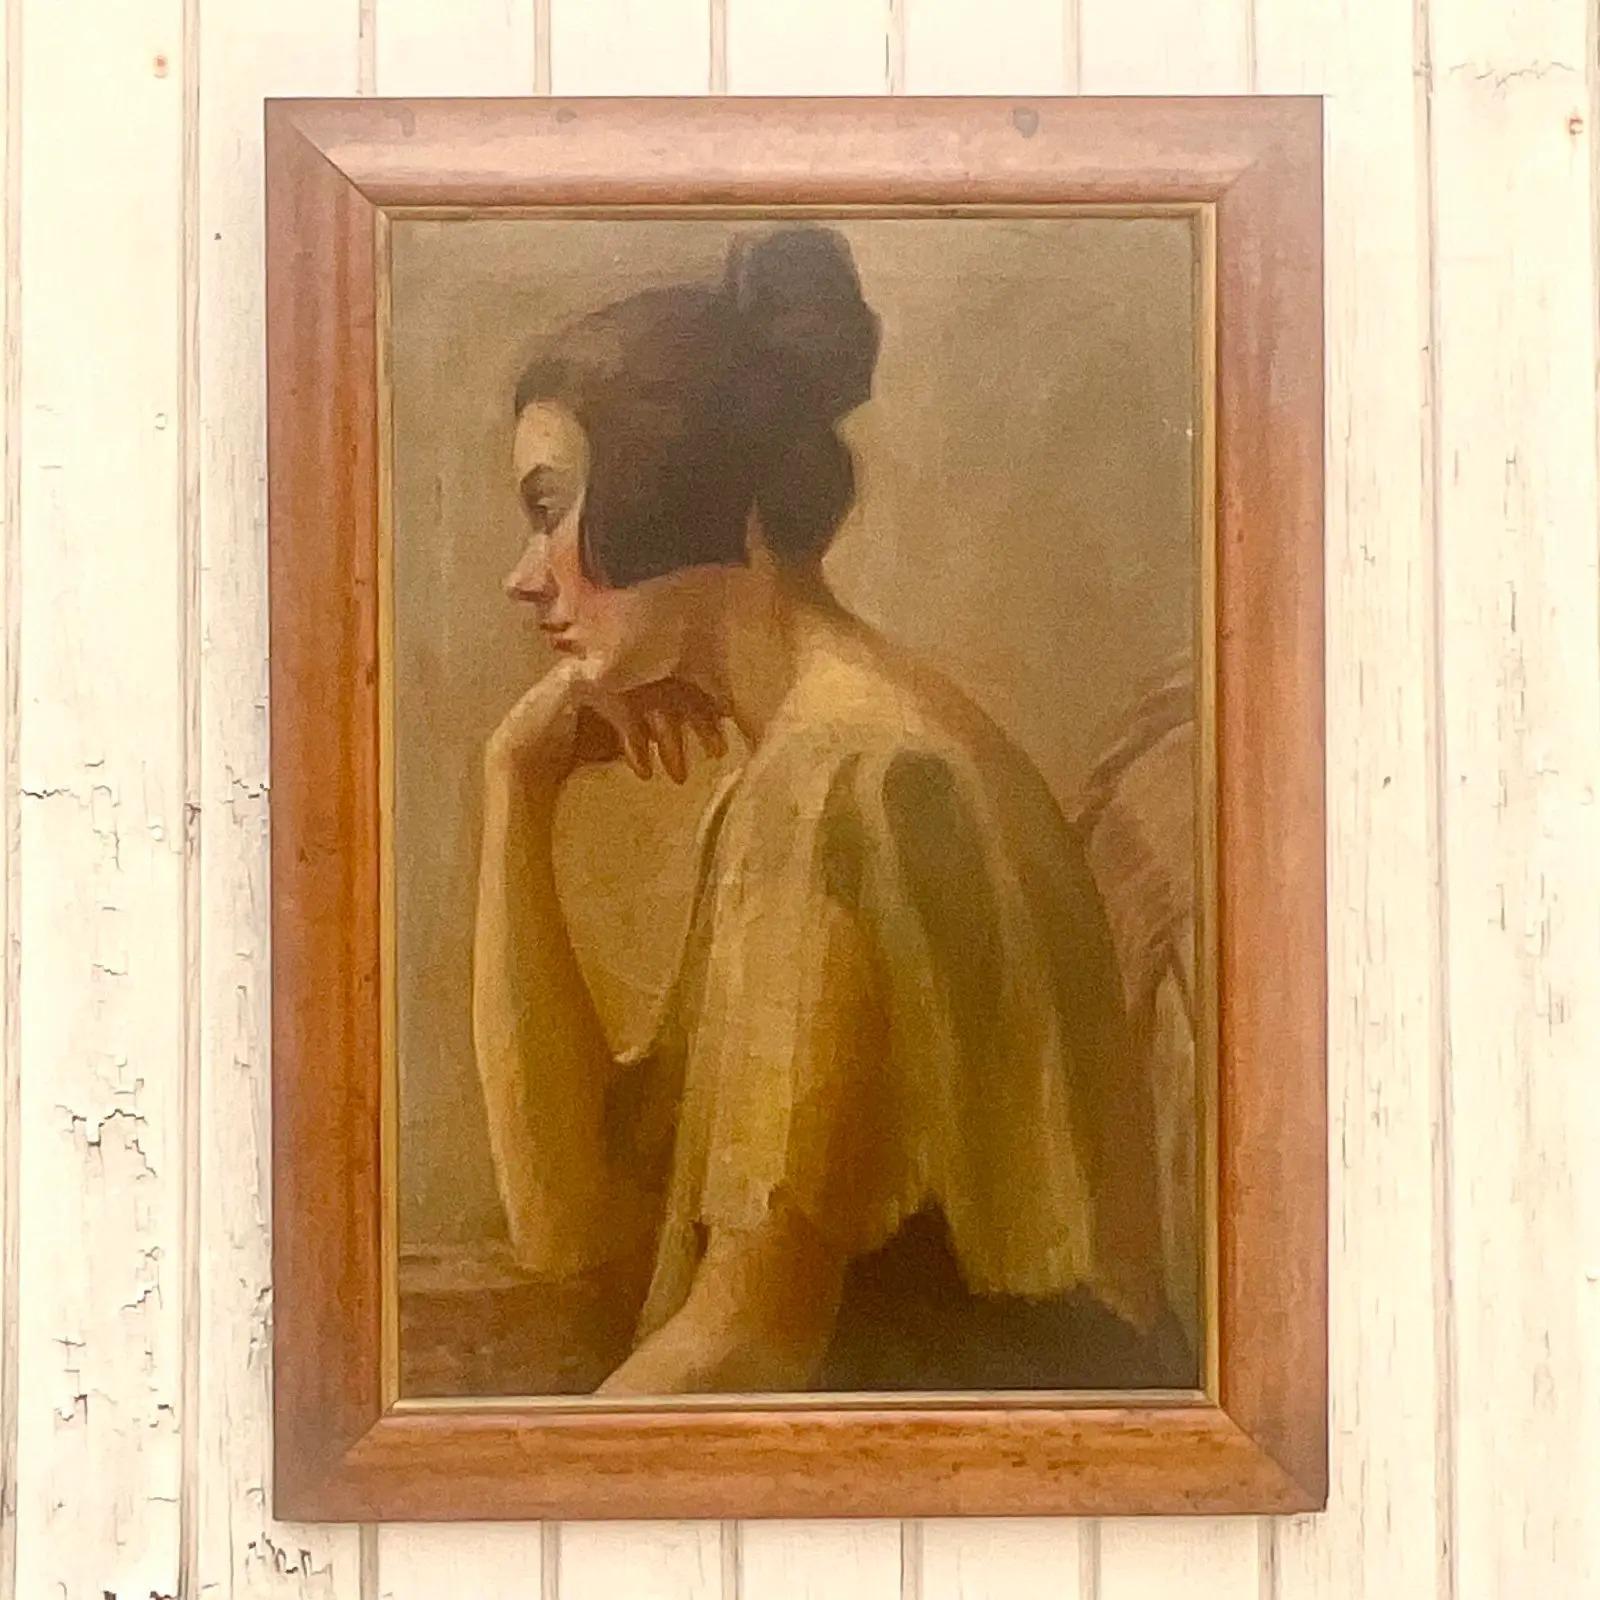 Wood Vintage Boho Unsigned Original Oil Painting of Woman